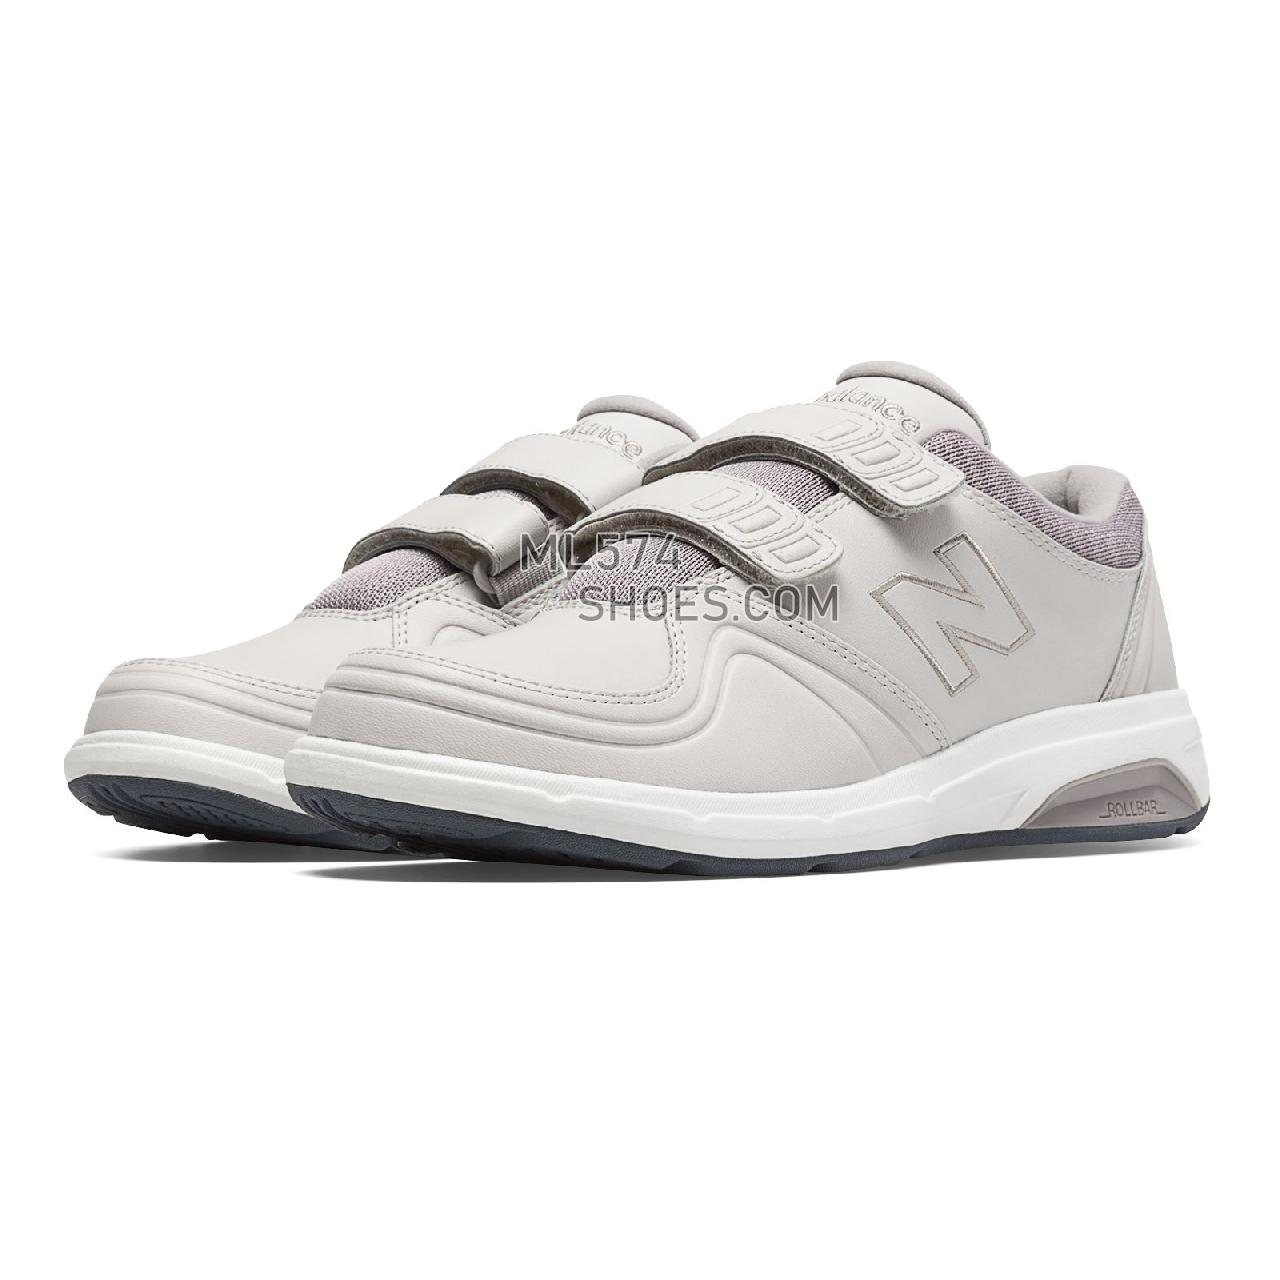 New Balance Women's Hook and Loop 813 - Women's 813 - Walking Off White - WW813HGY